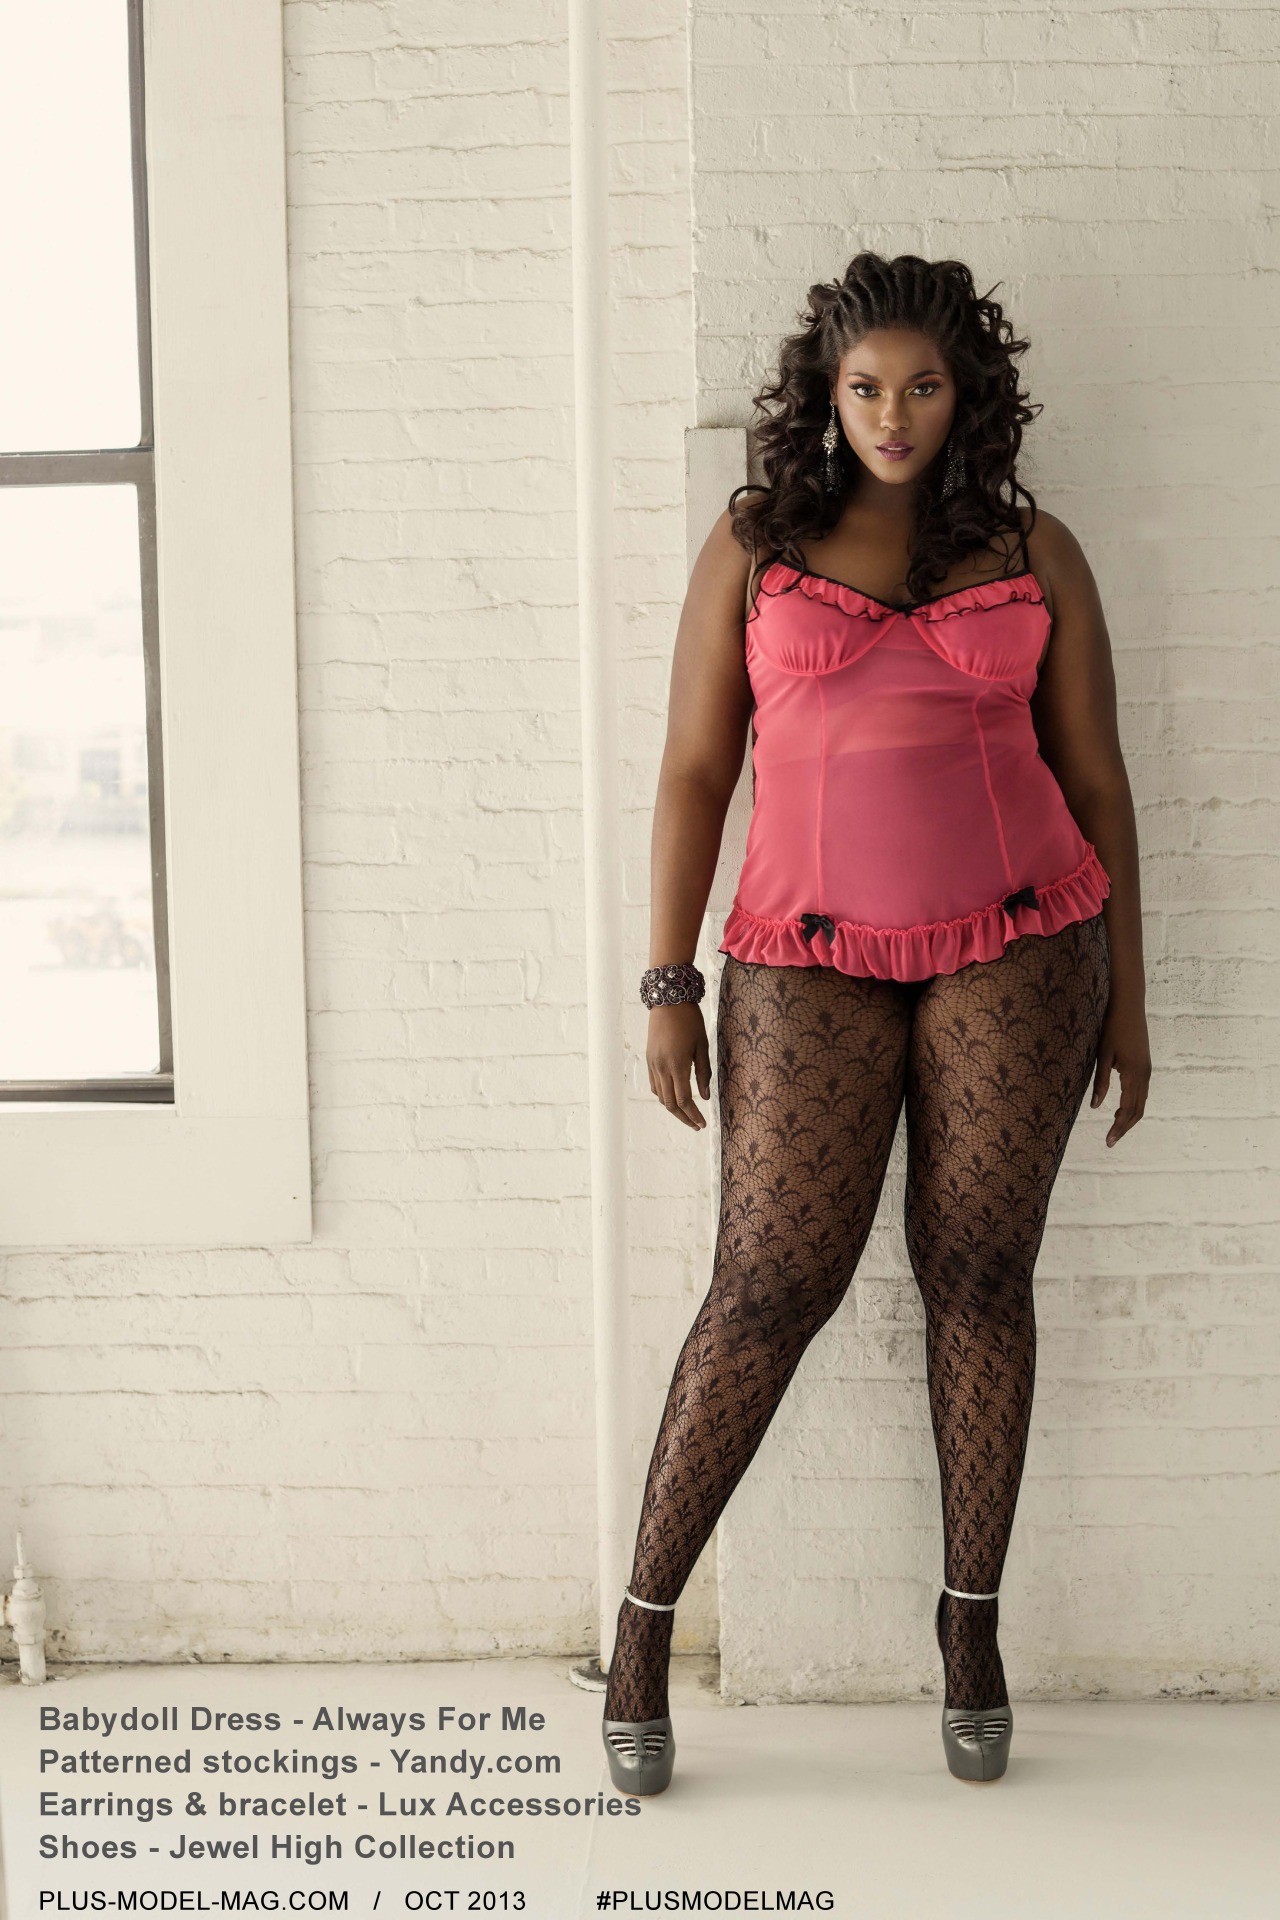 Plus Model Magazine Curves Are Beautiful… Plus Size Models Are